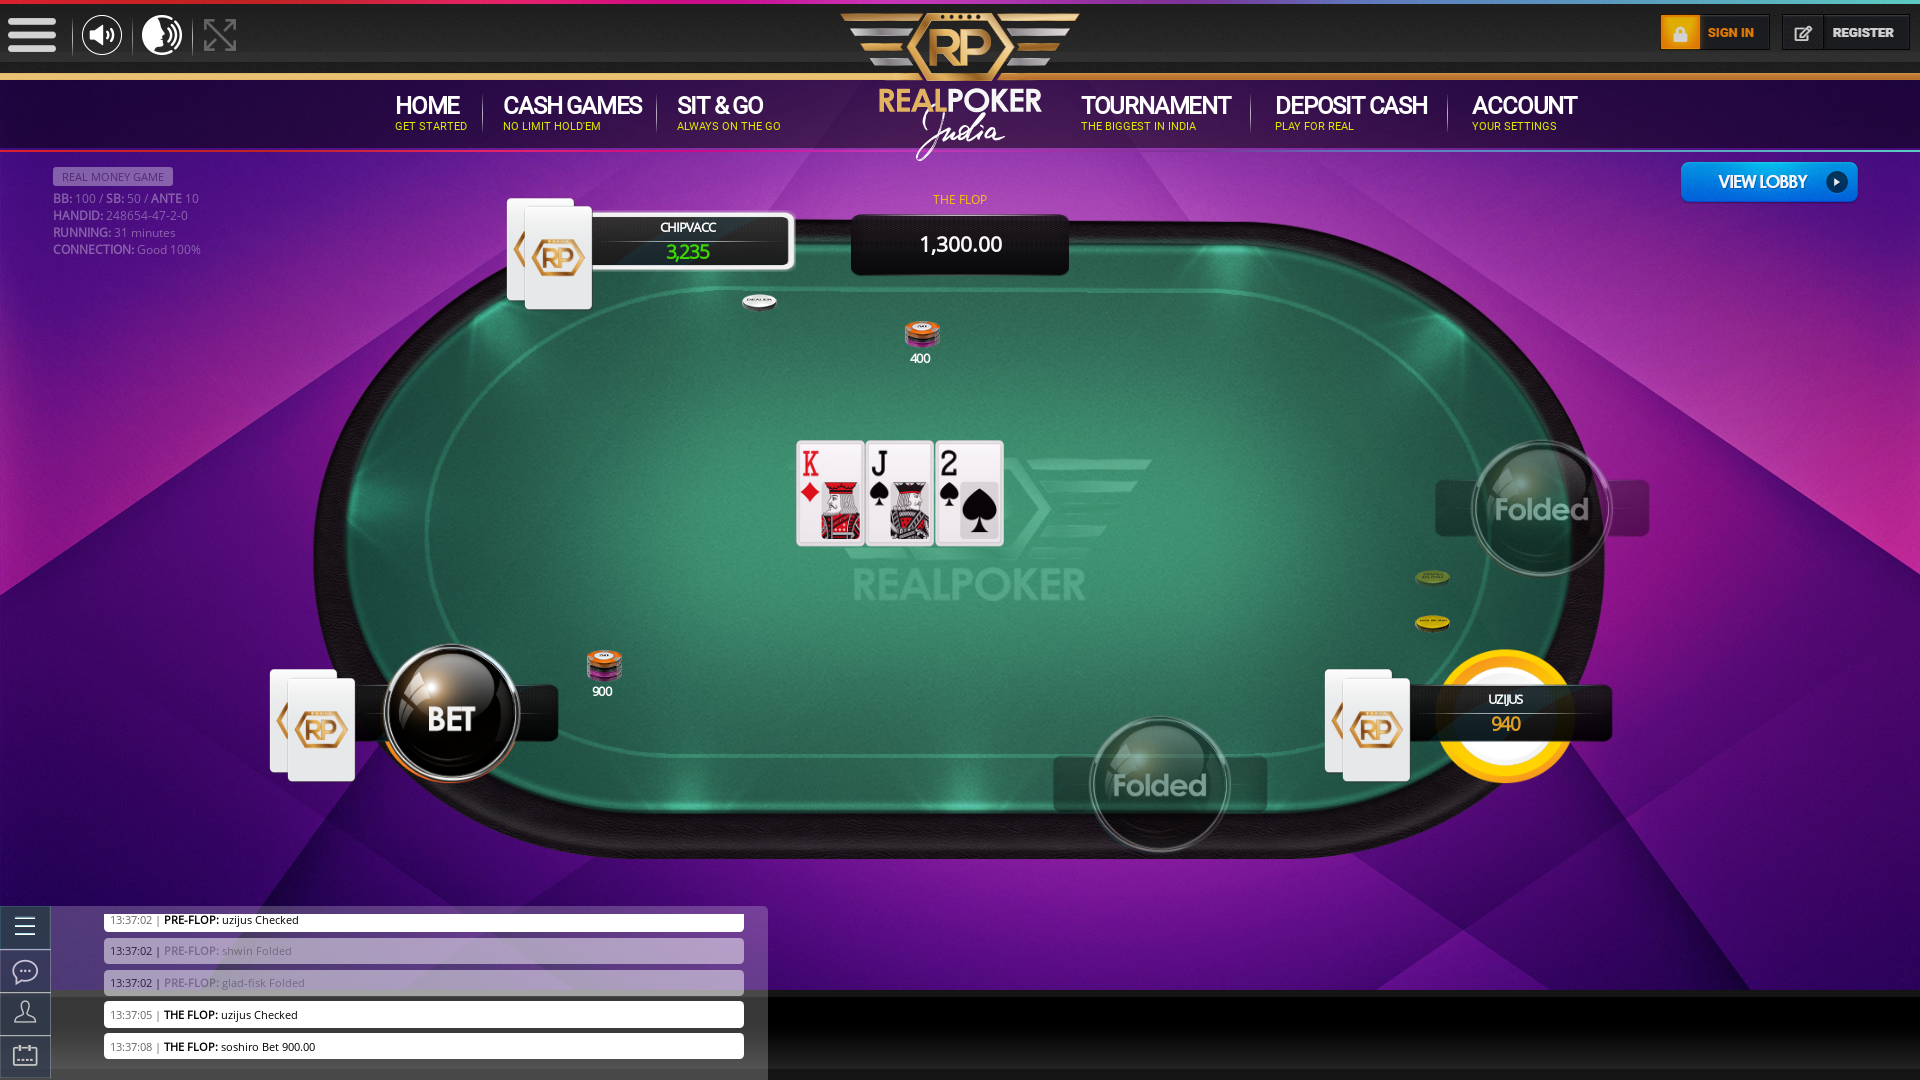 Real poker on a 10 player table in the 30th minute of the game